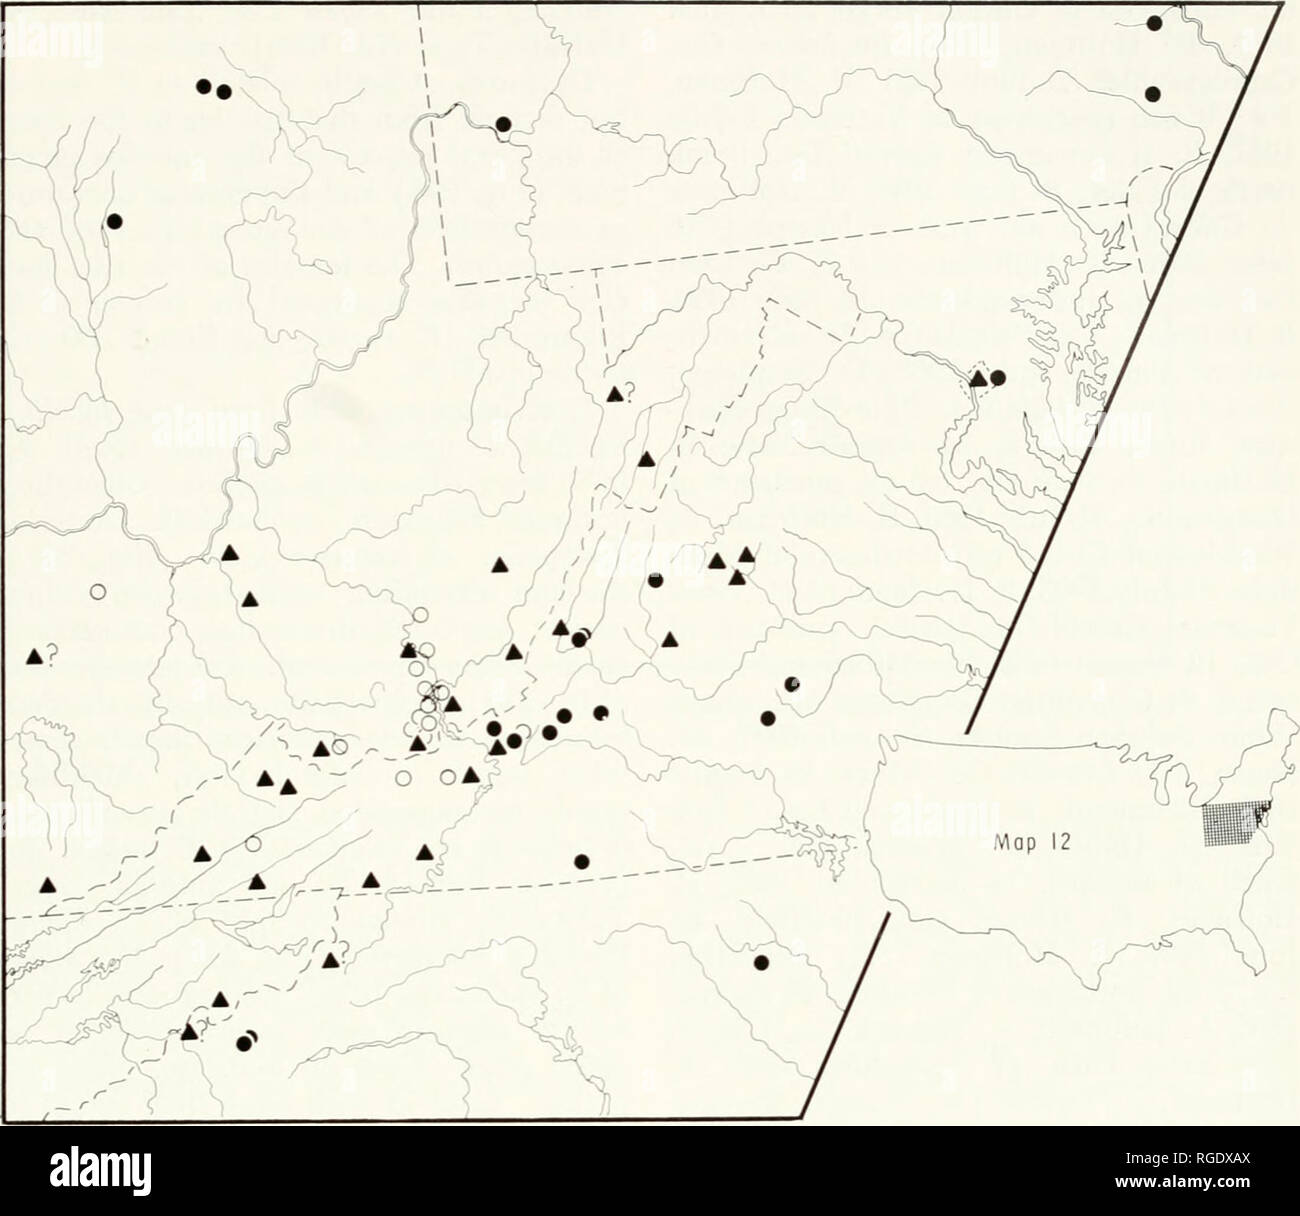 . Bulletin of the Museum of Comparative Zoology at Harvard College. Zoology. Studies in Chordeumida • Shear 225. Map 12. West Virginia and parts of ad|acent states, showing distribution of species of Cleidogona. Dots, C. coes/oonnu/oto; circles, C. fustis; triangles, C. major. Cleidogona fustis fios also been reported from Indiana and Ohio. broadly expanded apicalK', large and mo able. Posterior gonopods (Fig. 295): tpical of group, basal knob of coxa lo', rounded; widest part of second segment just beyond midlength. Coxa 10 and 11 and sternal process 12 as usual. Description of fenmle fro Stock Photo